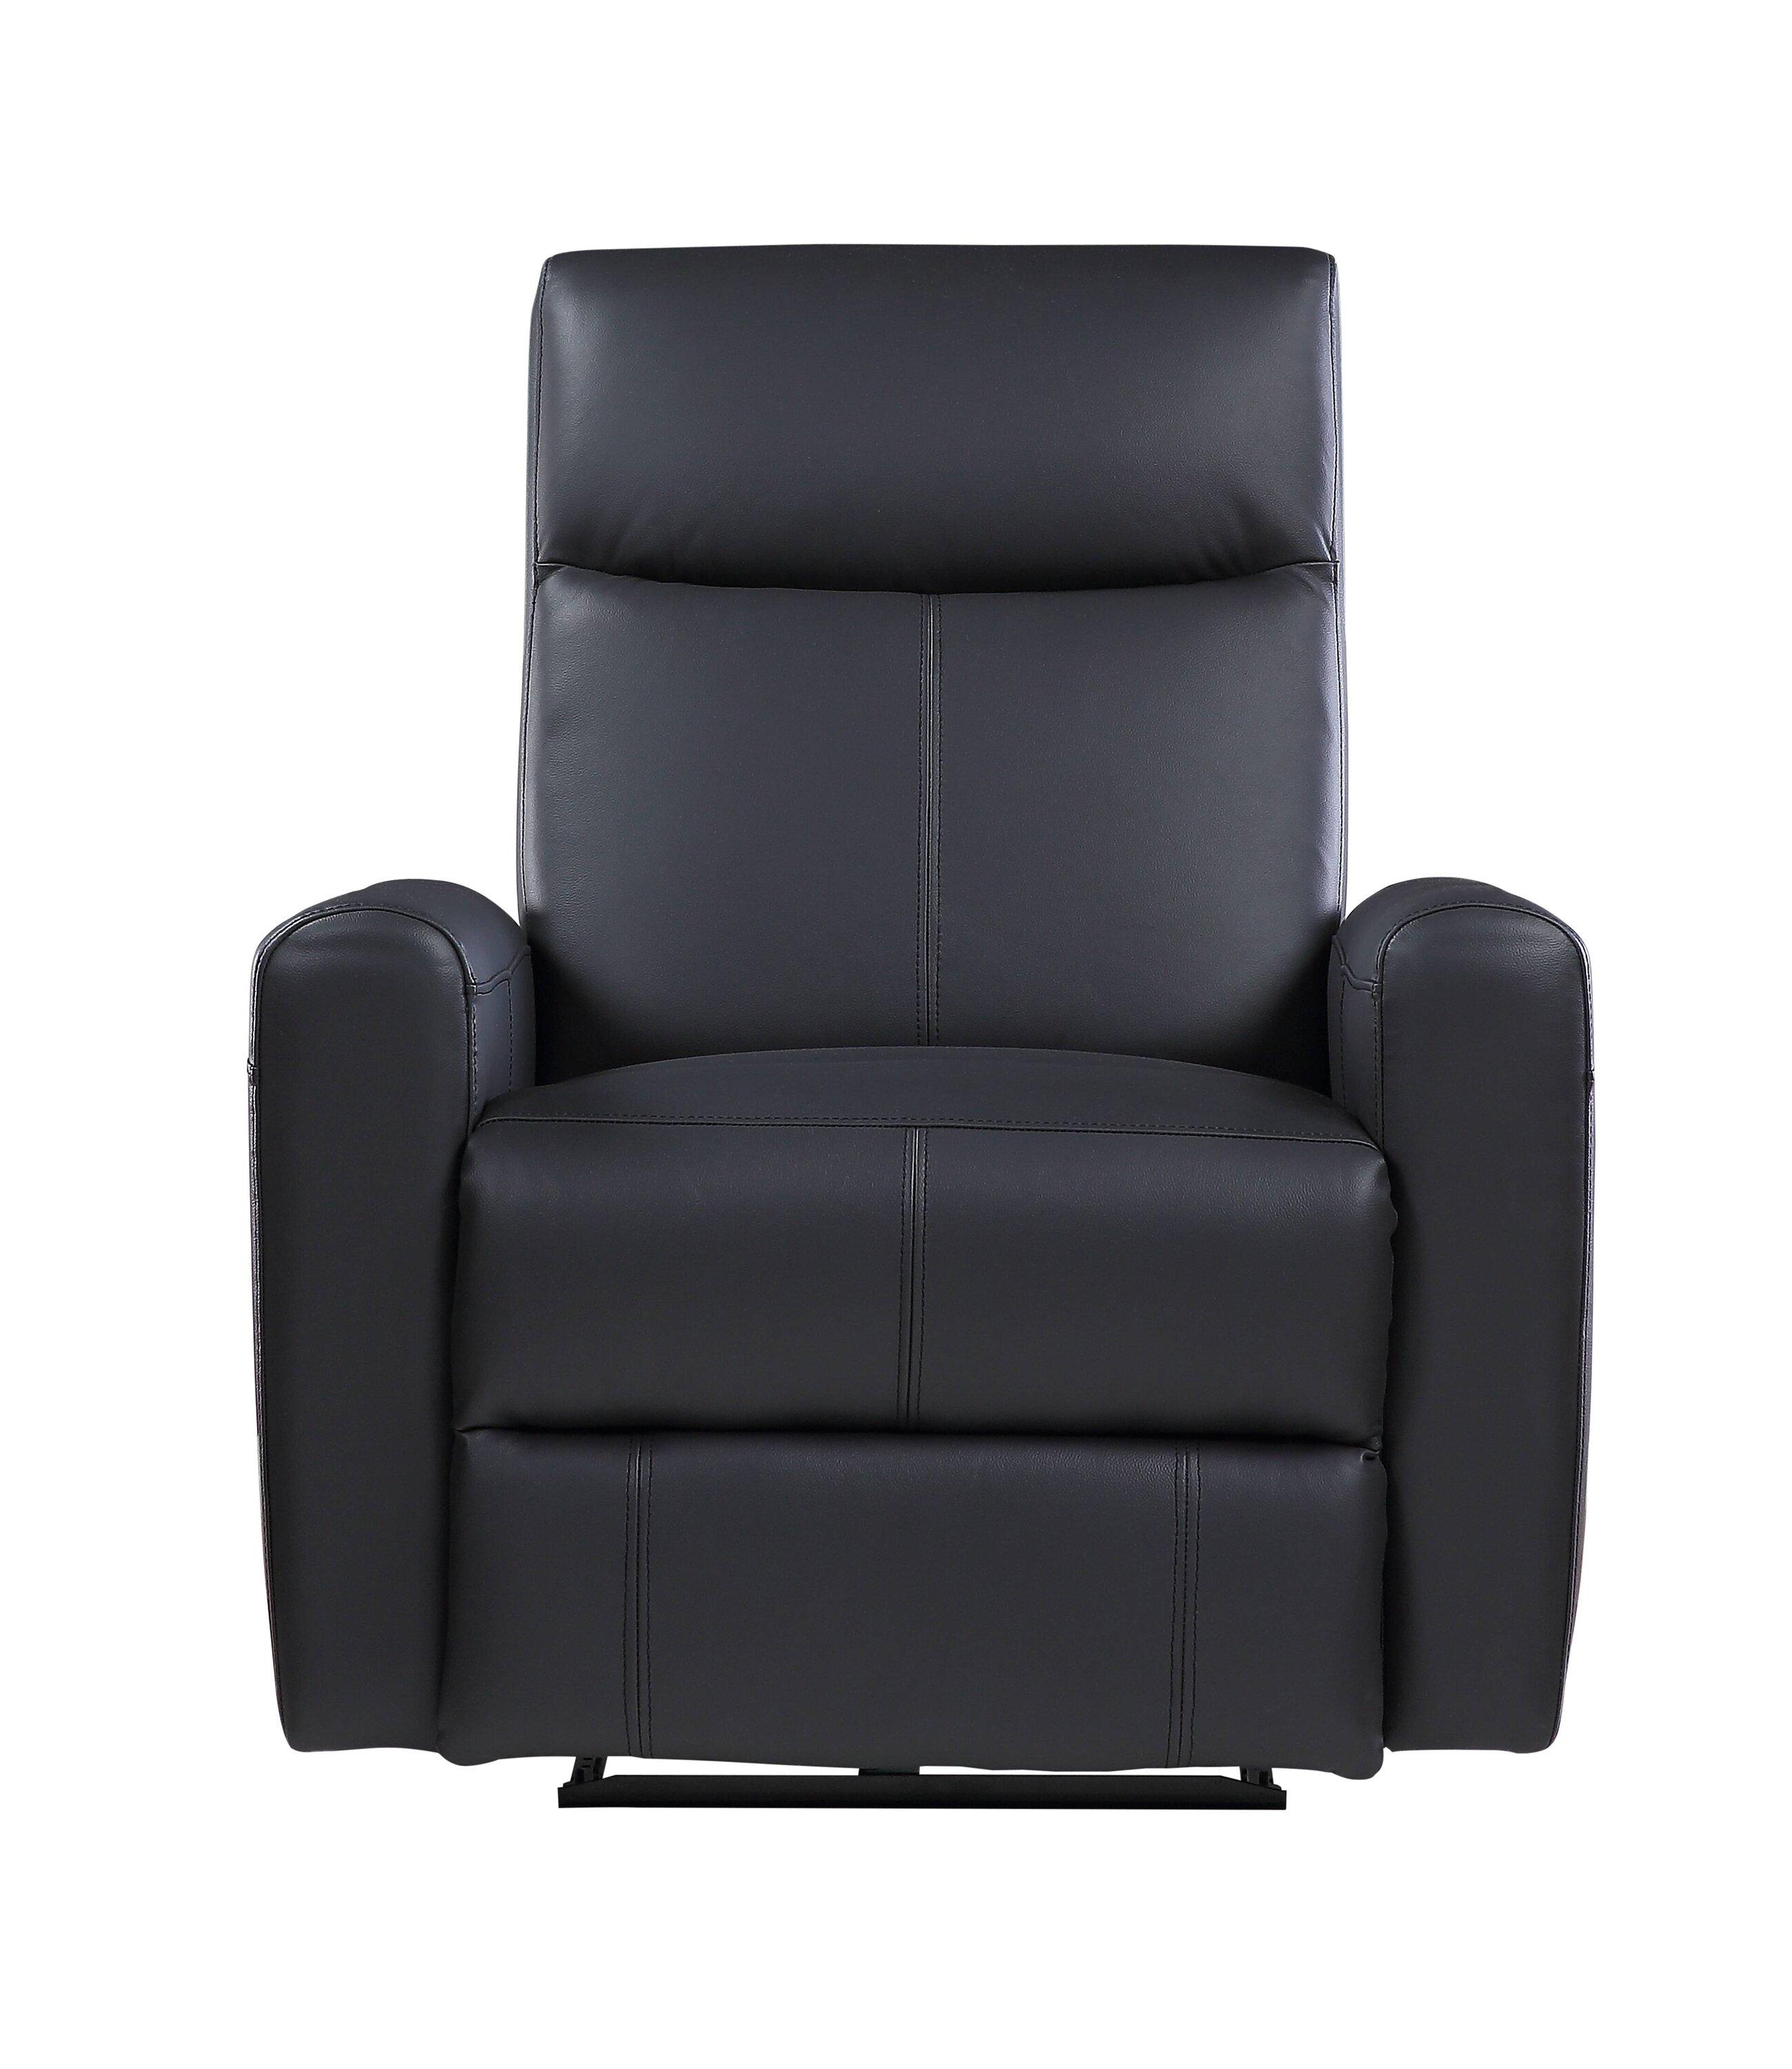 

                    
Acme Furniture Blane Recliner Black Top grain leather Purchase 
